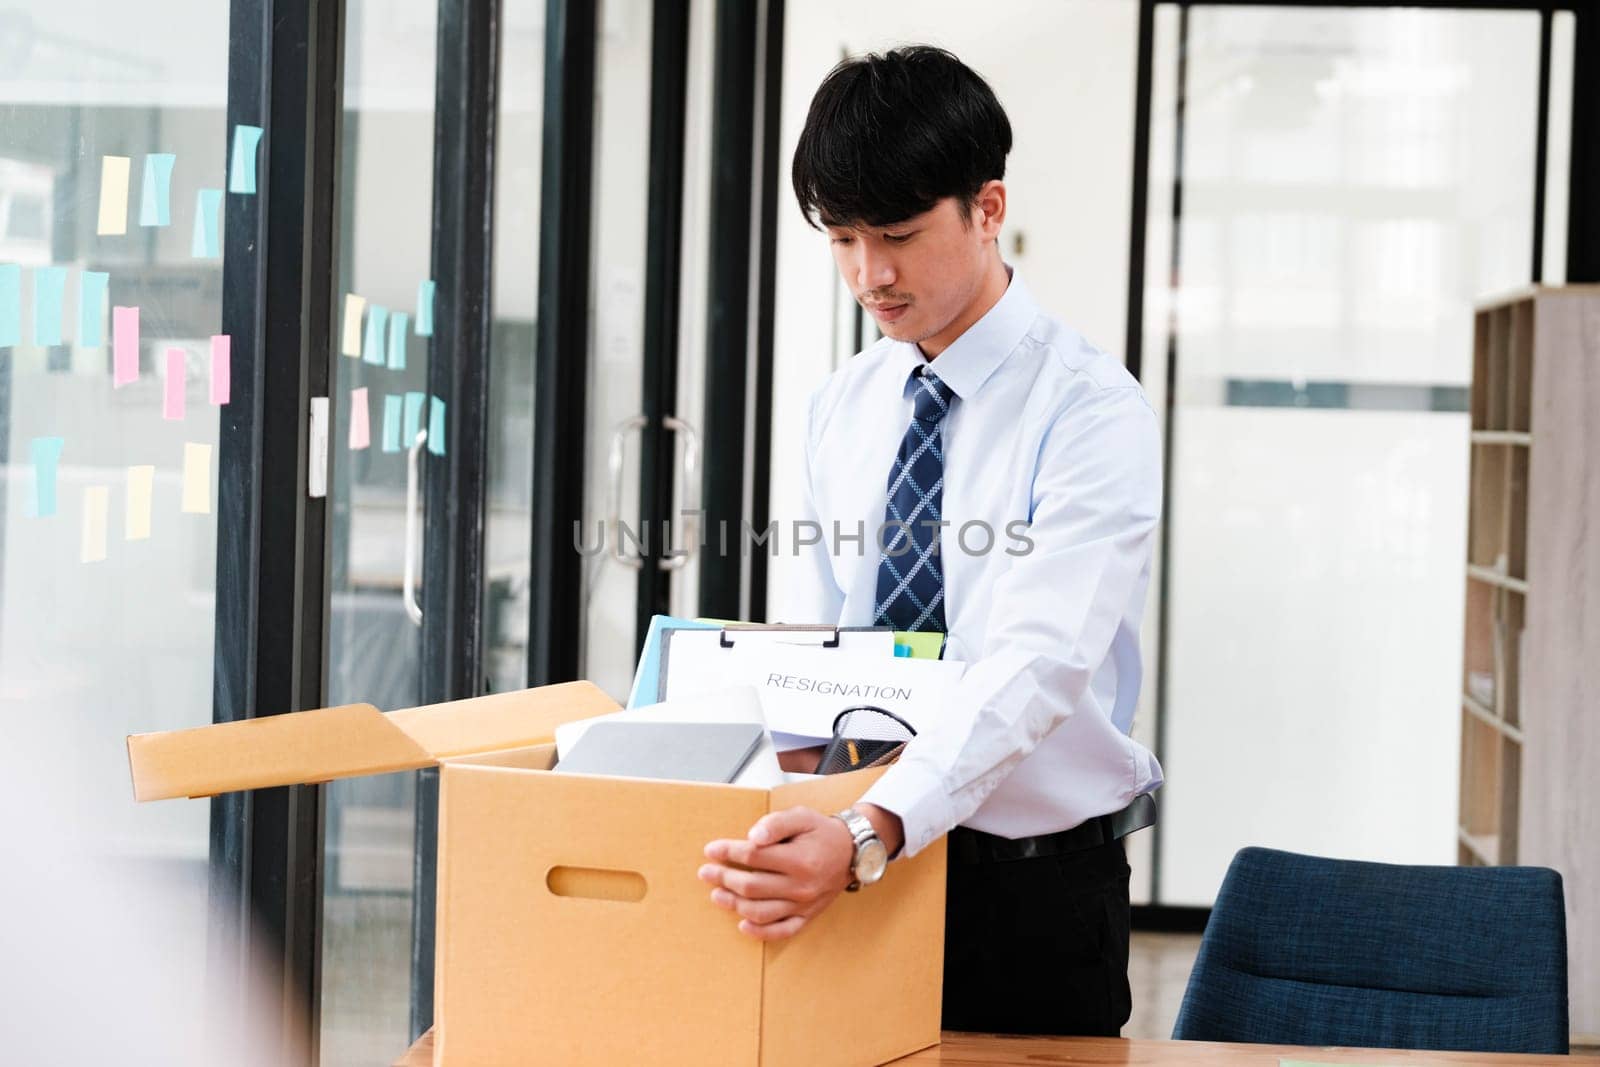 A man in a suit is opening a cardboard box on a desk by ijeab